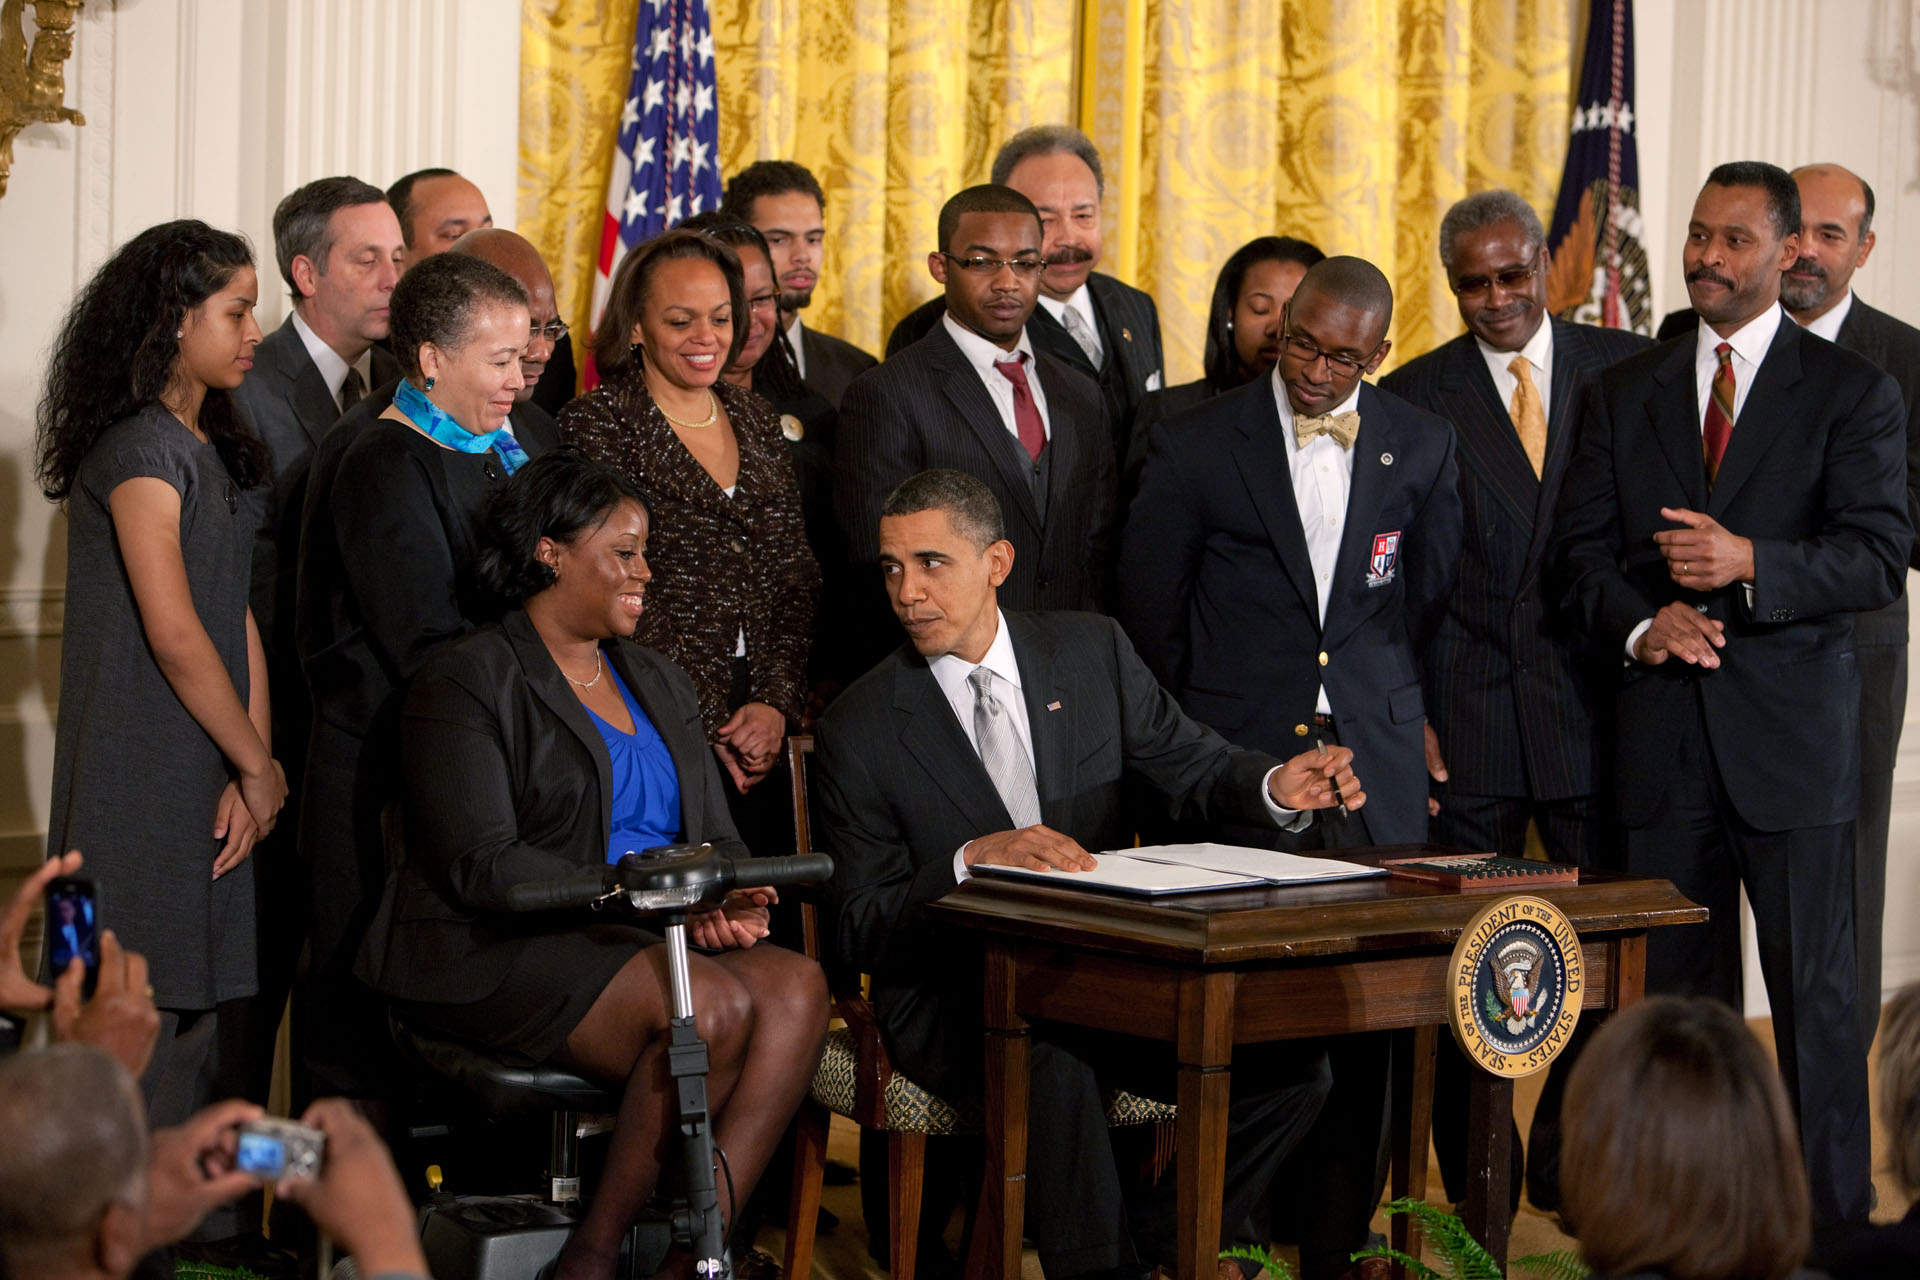 President Barack Obama signs an executive order for the White House Initiative on Historically Black Colleges and Universities in the East Room of the White House,, Feb. 26, 2010. (Official White House Photo by Chuck Kennedy)